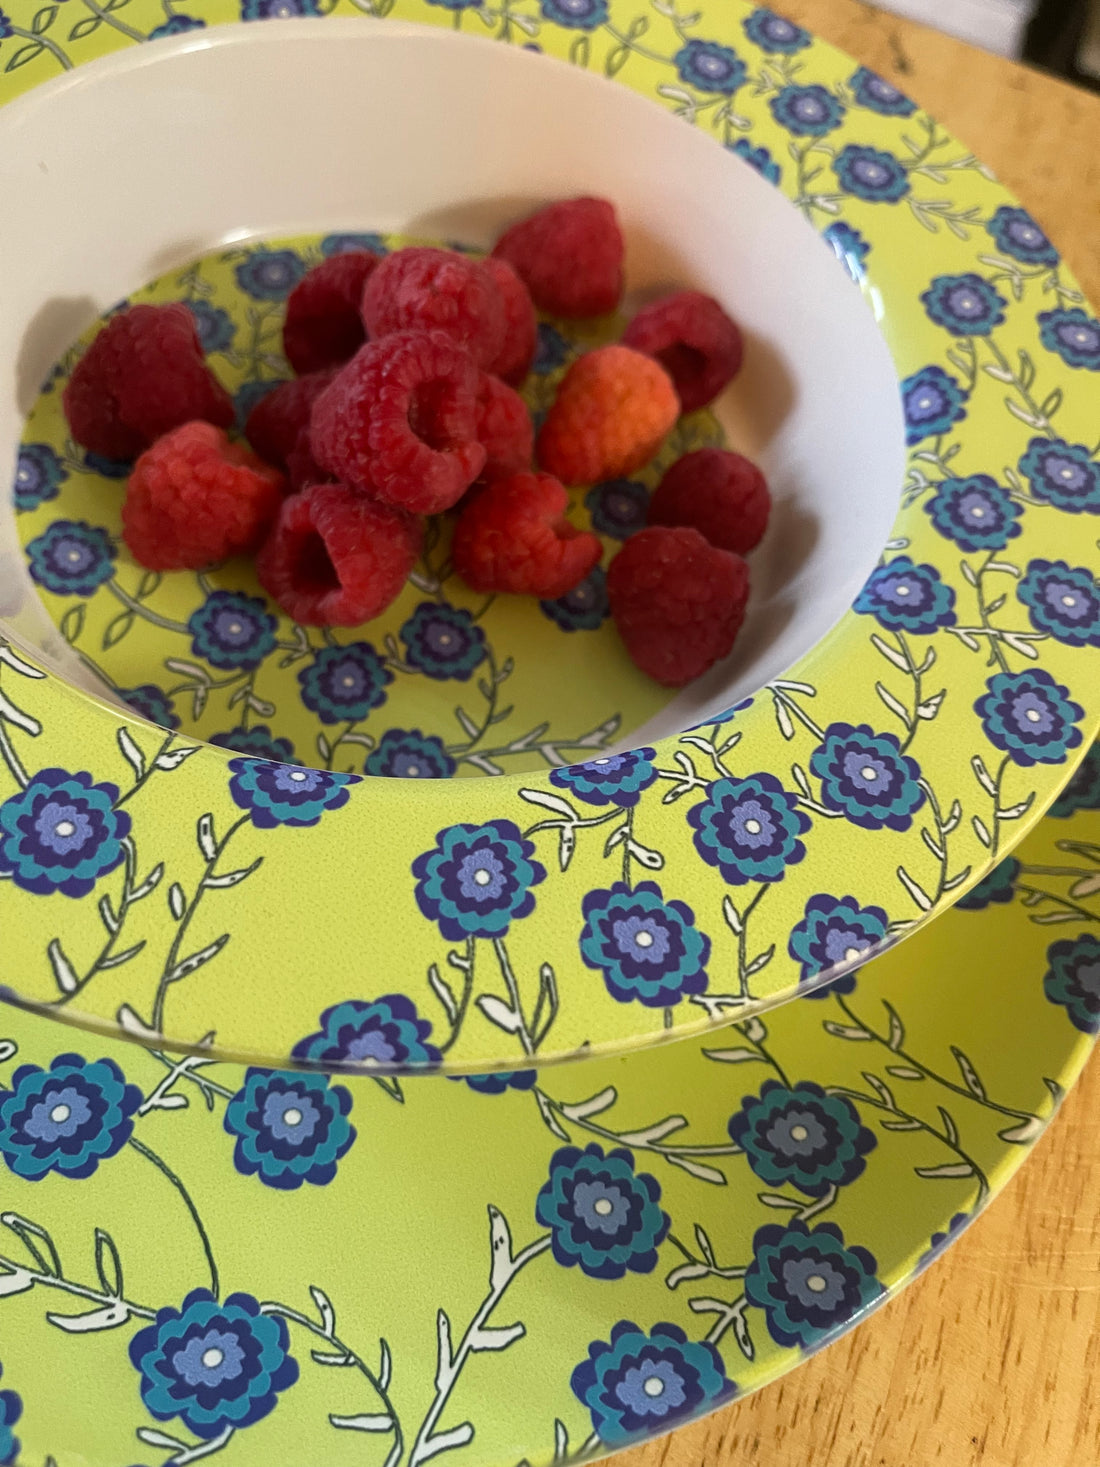 Dinner Plate and Bowl Review From Teelaunch for Blue Daisy Emporium